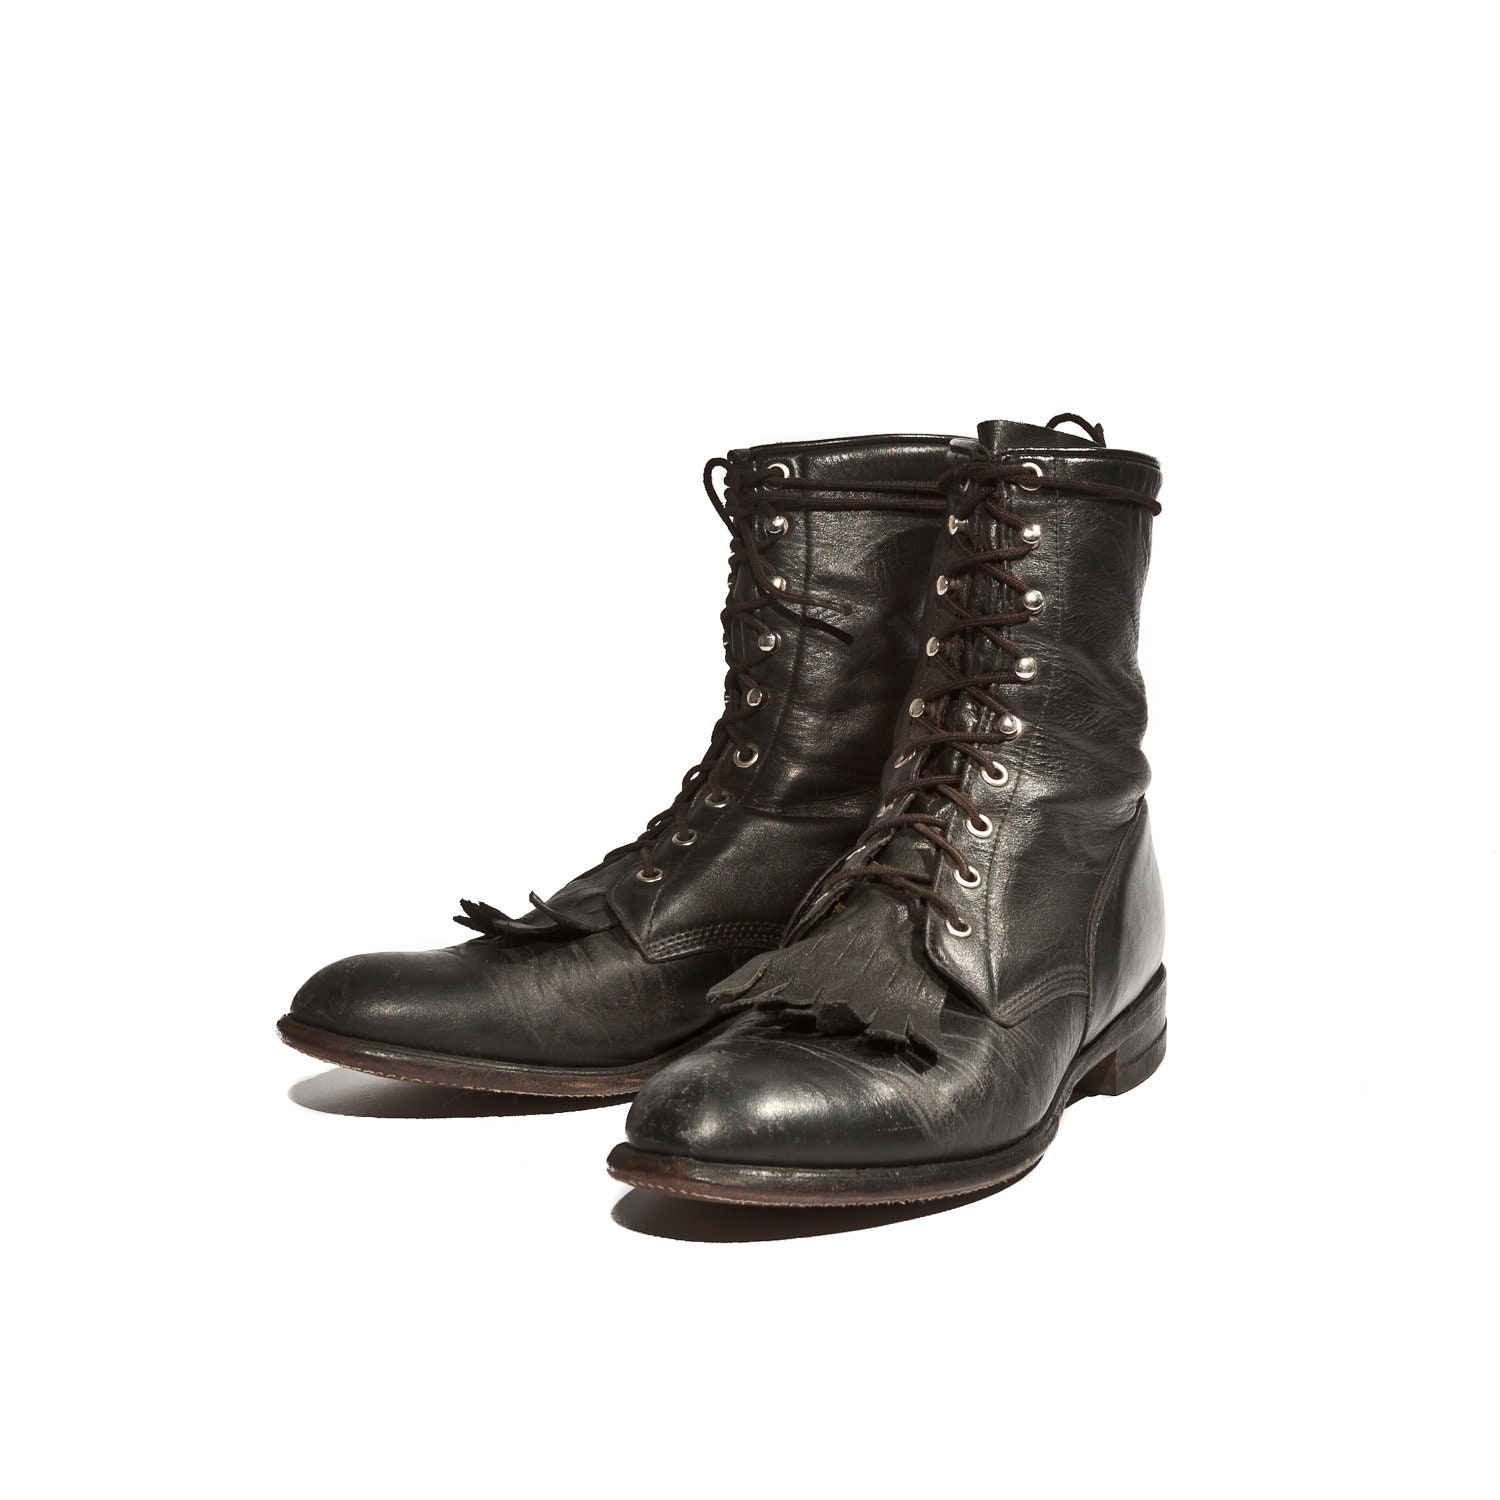 Men's Justin Roper Boot in Lace Up Black Leather by NashDryGoods